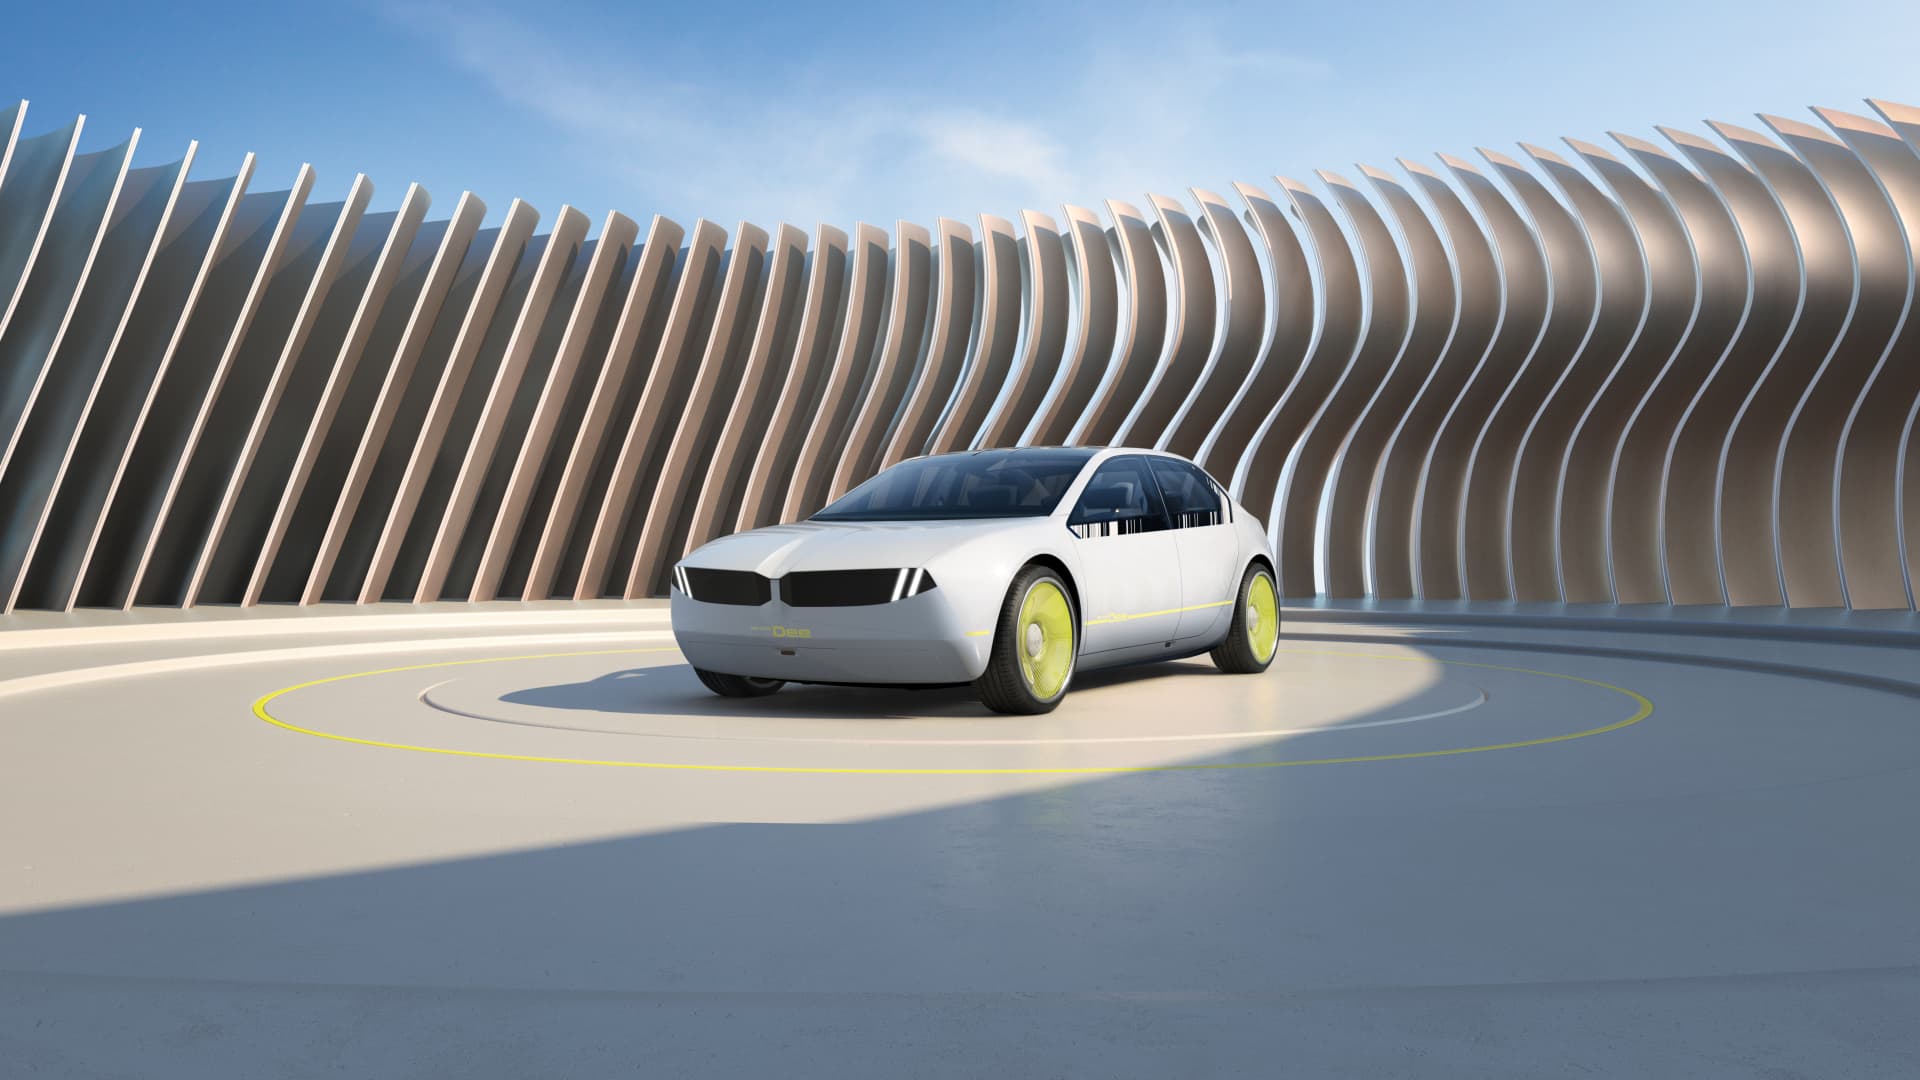 Check out BMW’s new color-changing concept car, the i Vision Dee